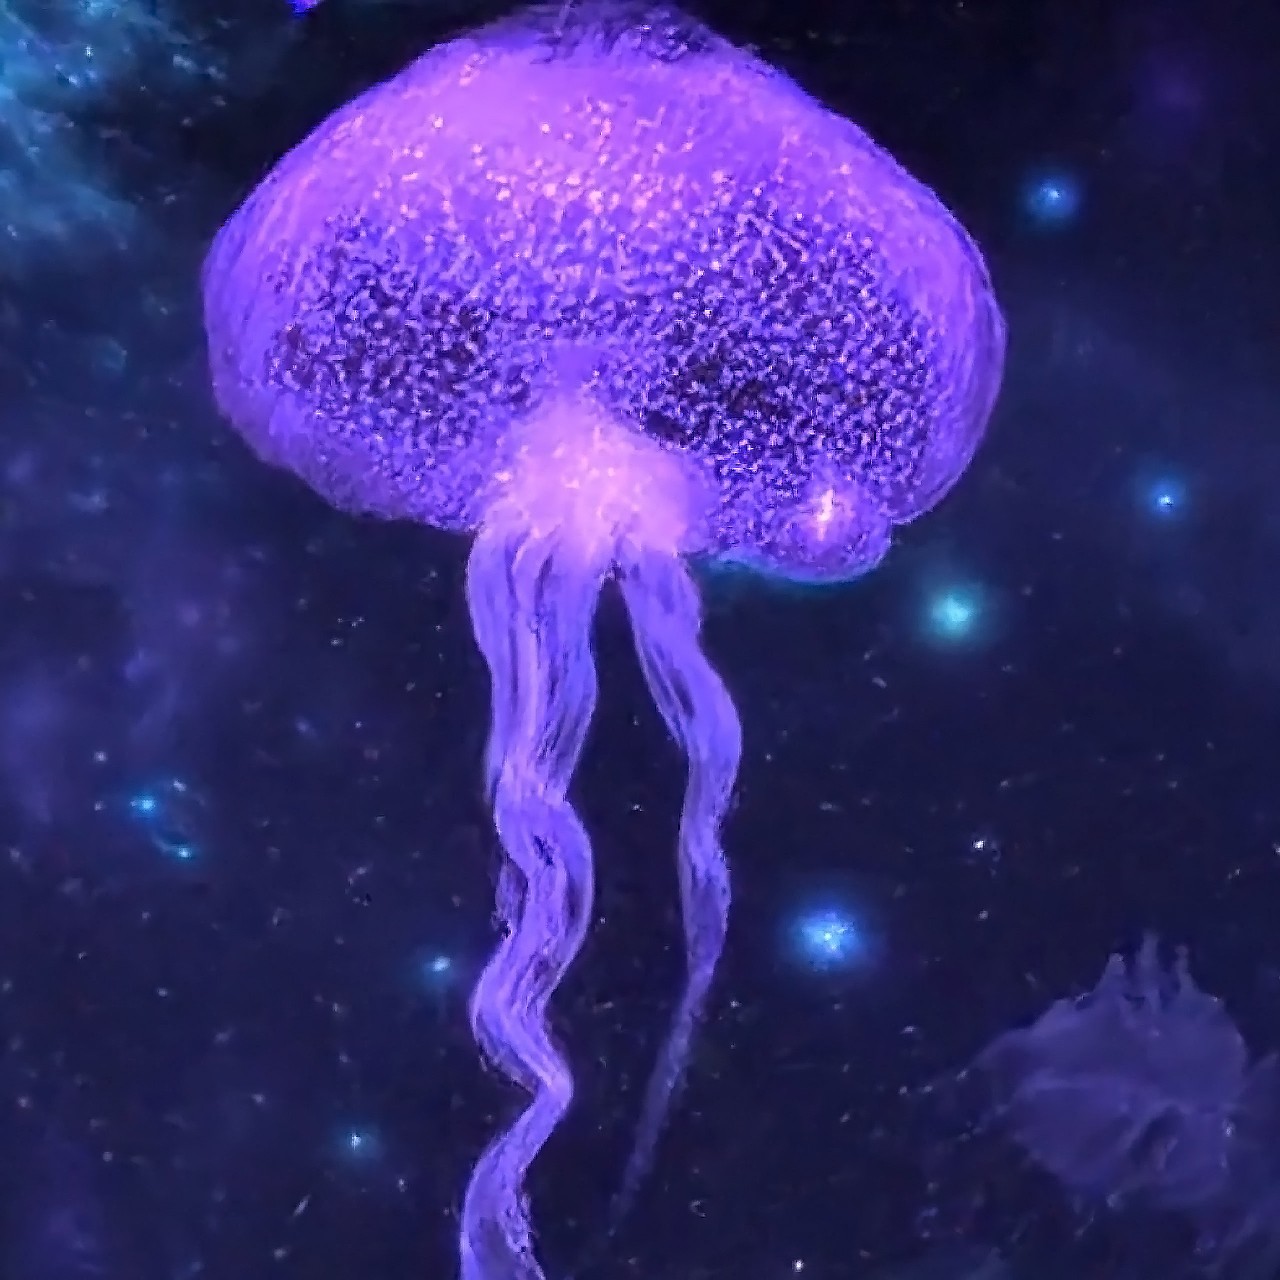 Edify generates a jellyfish swimming off the frame in a text to video model.